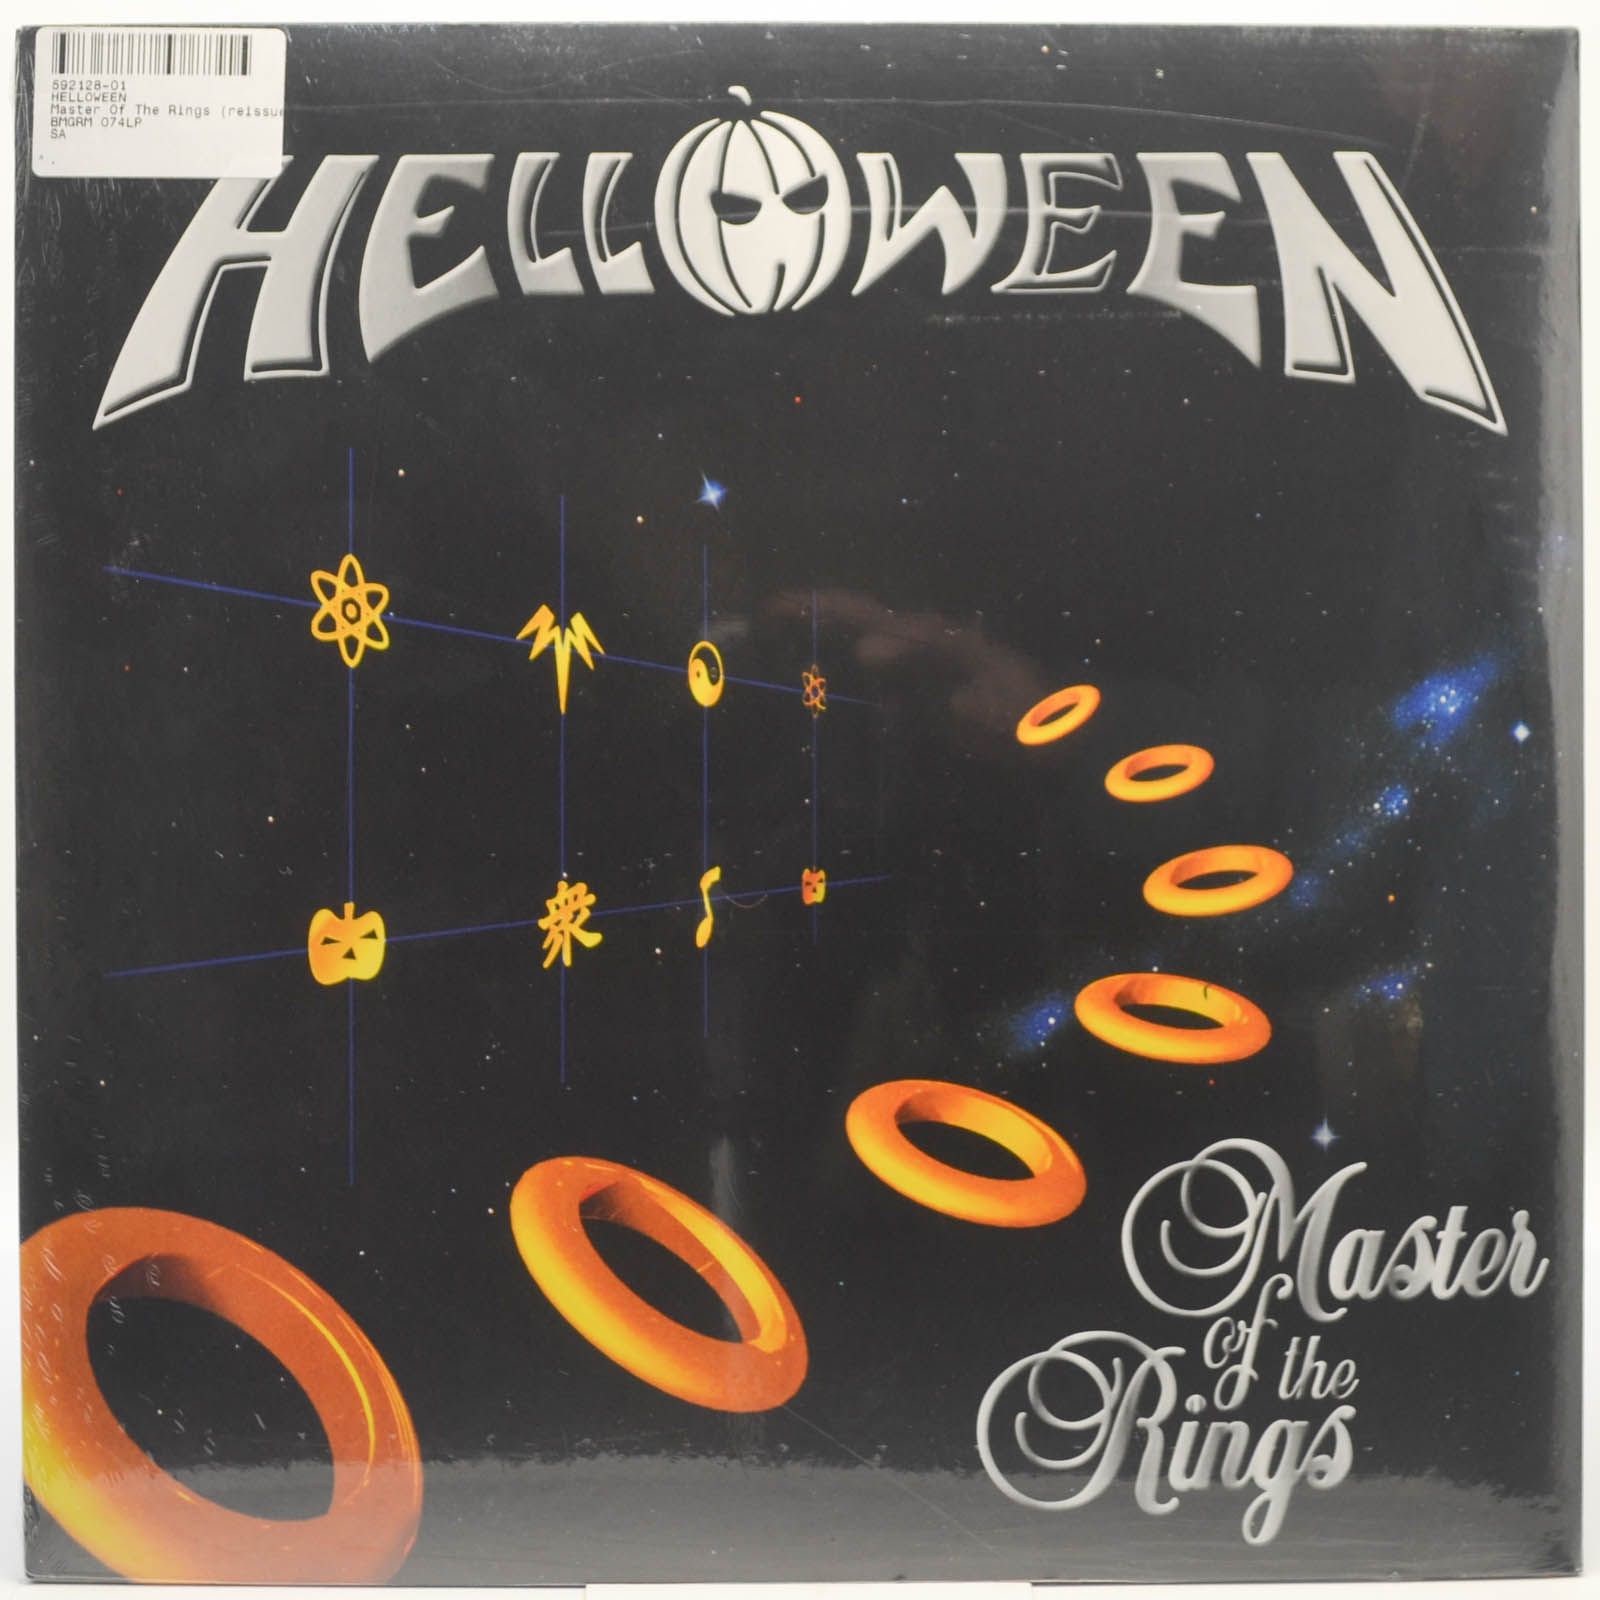 Helloween — Master of the Rings, 1994